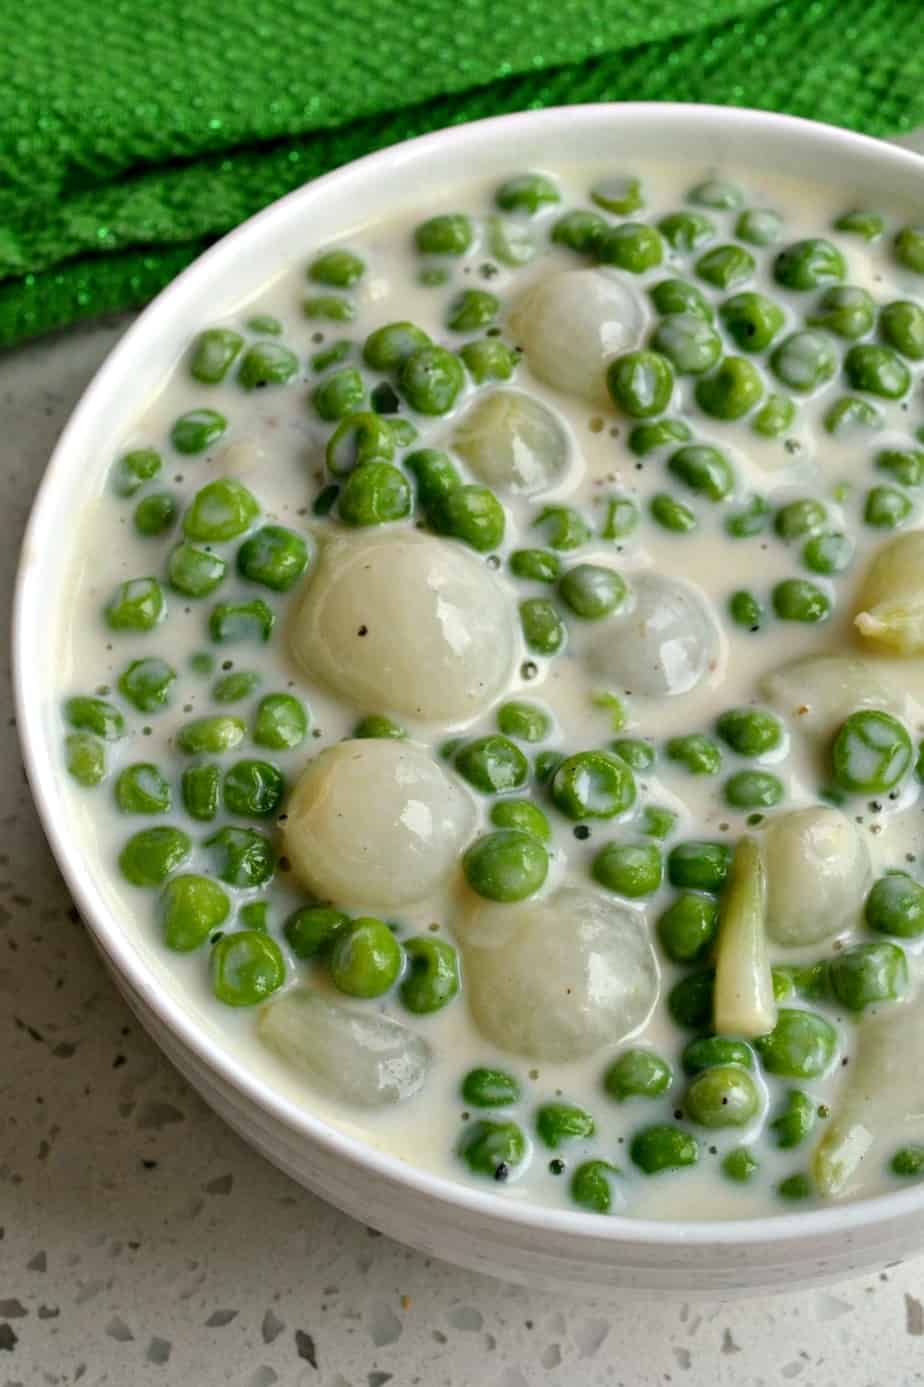 Ooit Beer explosie Creamed Peas with Pearl Onions - Small Town Woman